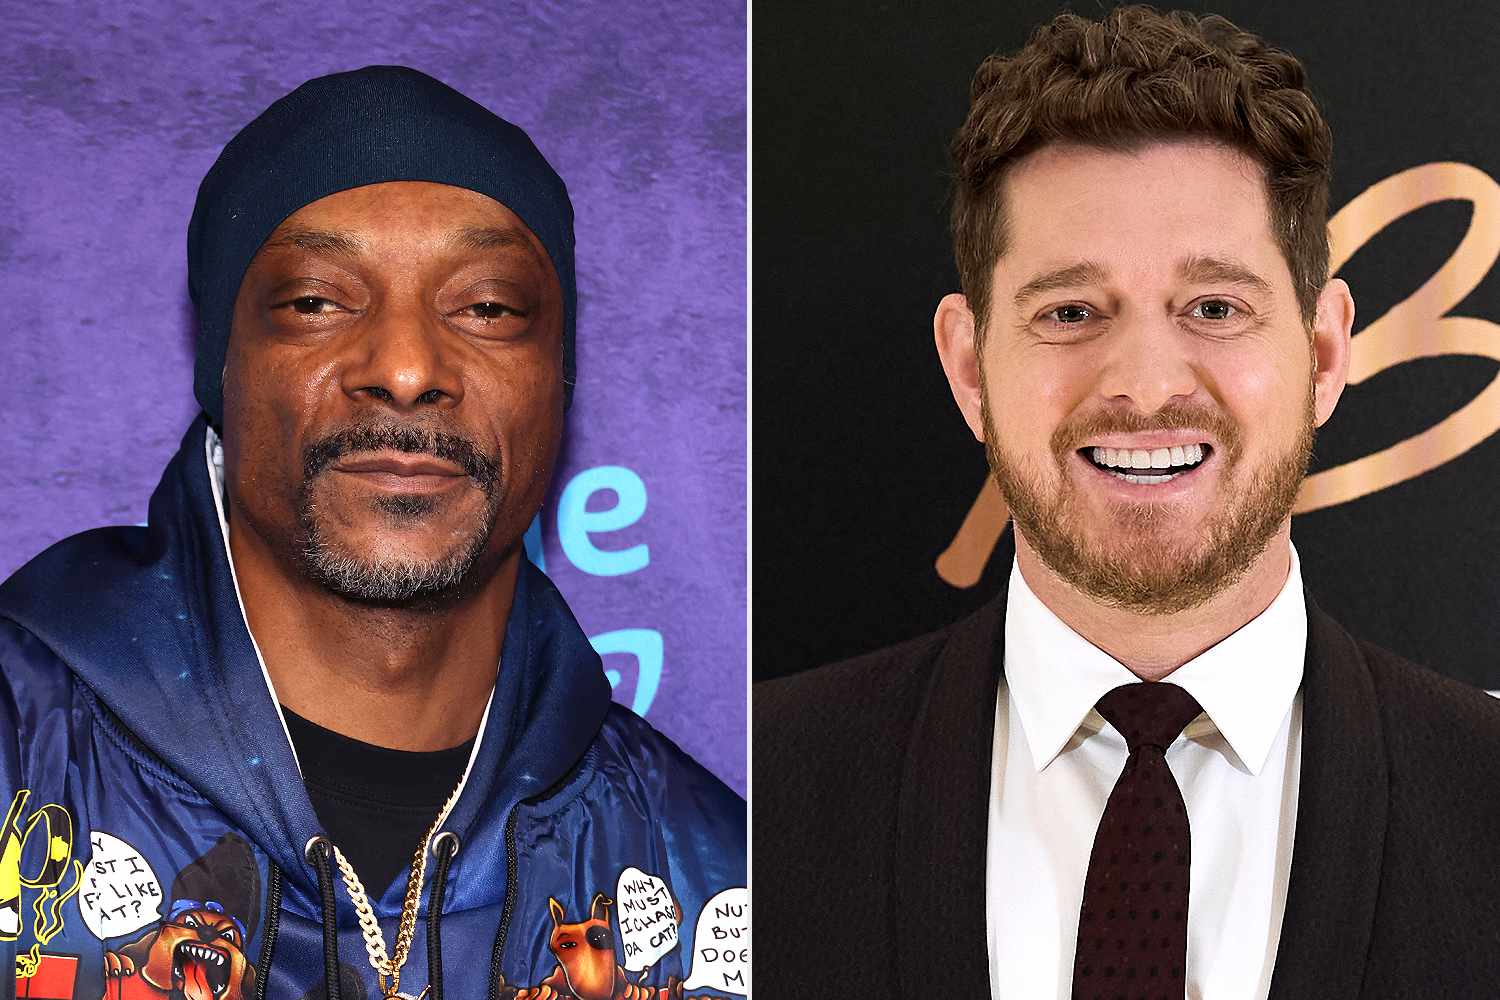 Snoop Dogg, Michael Bublé Join “The Voice ”Season 26 Alongside Returning Coaches Reba McEntire and Gwen Stefani